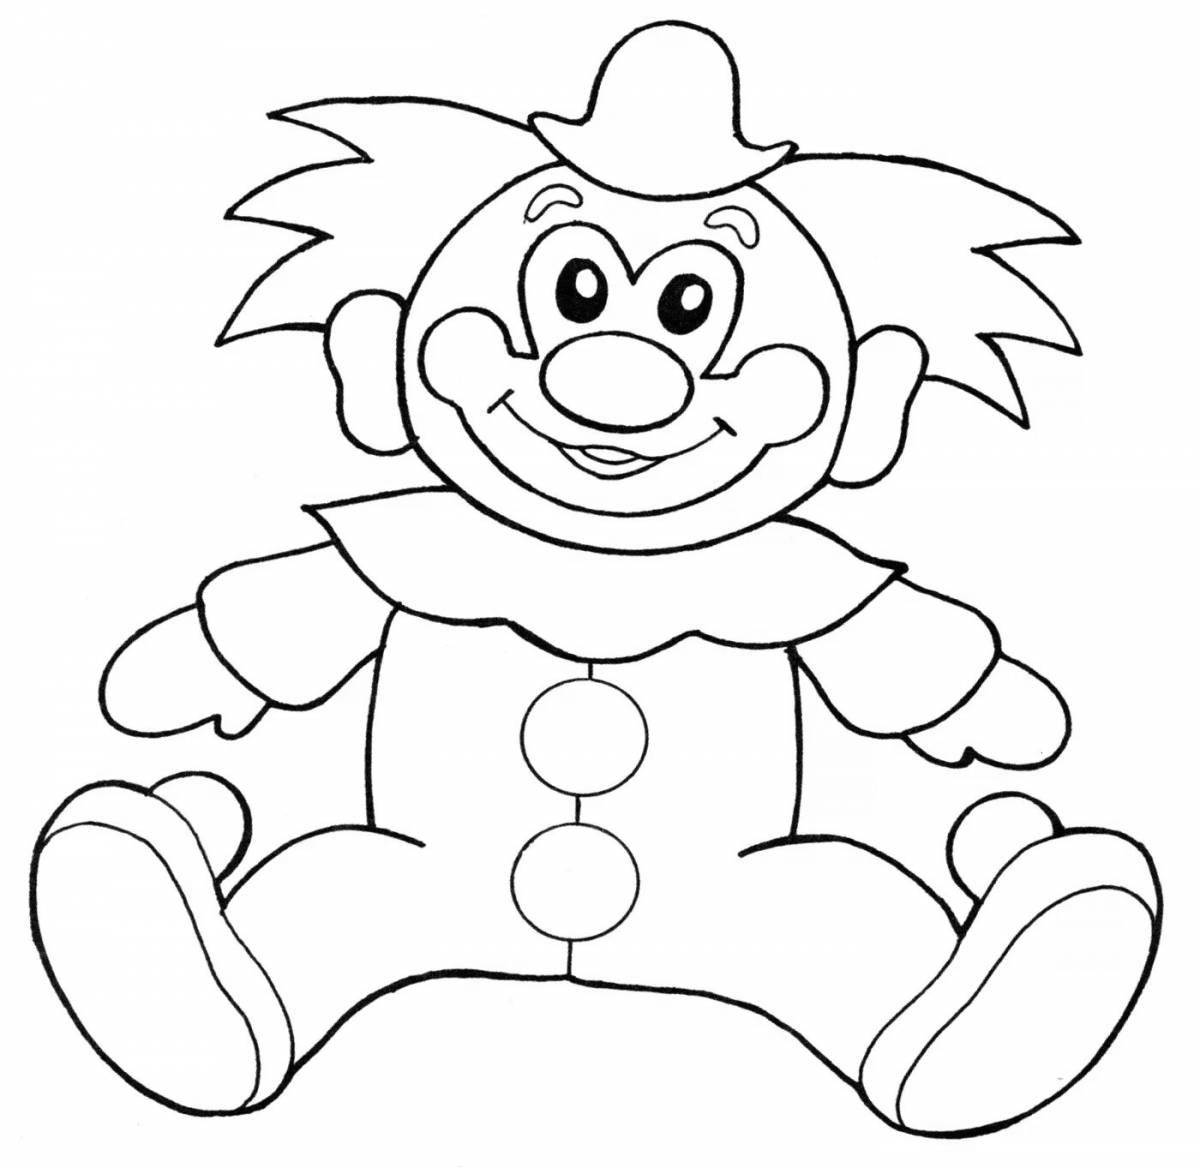 Bright clown coloring pages for kids